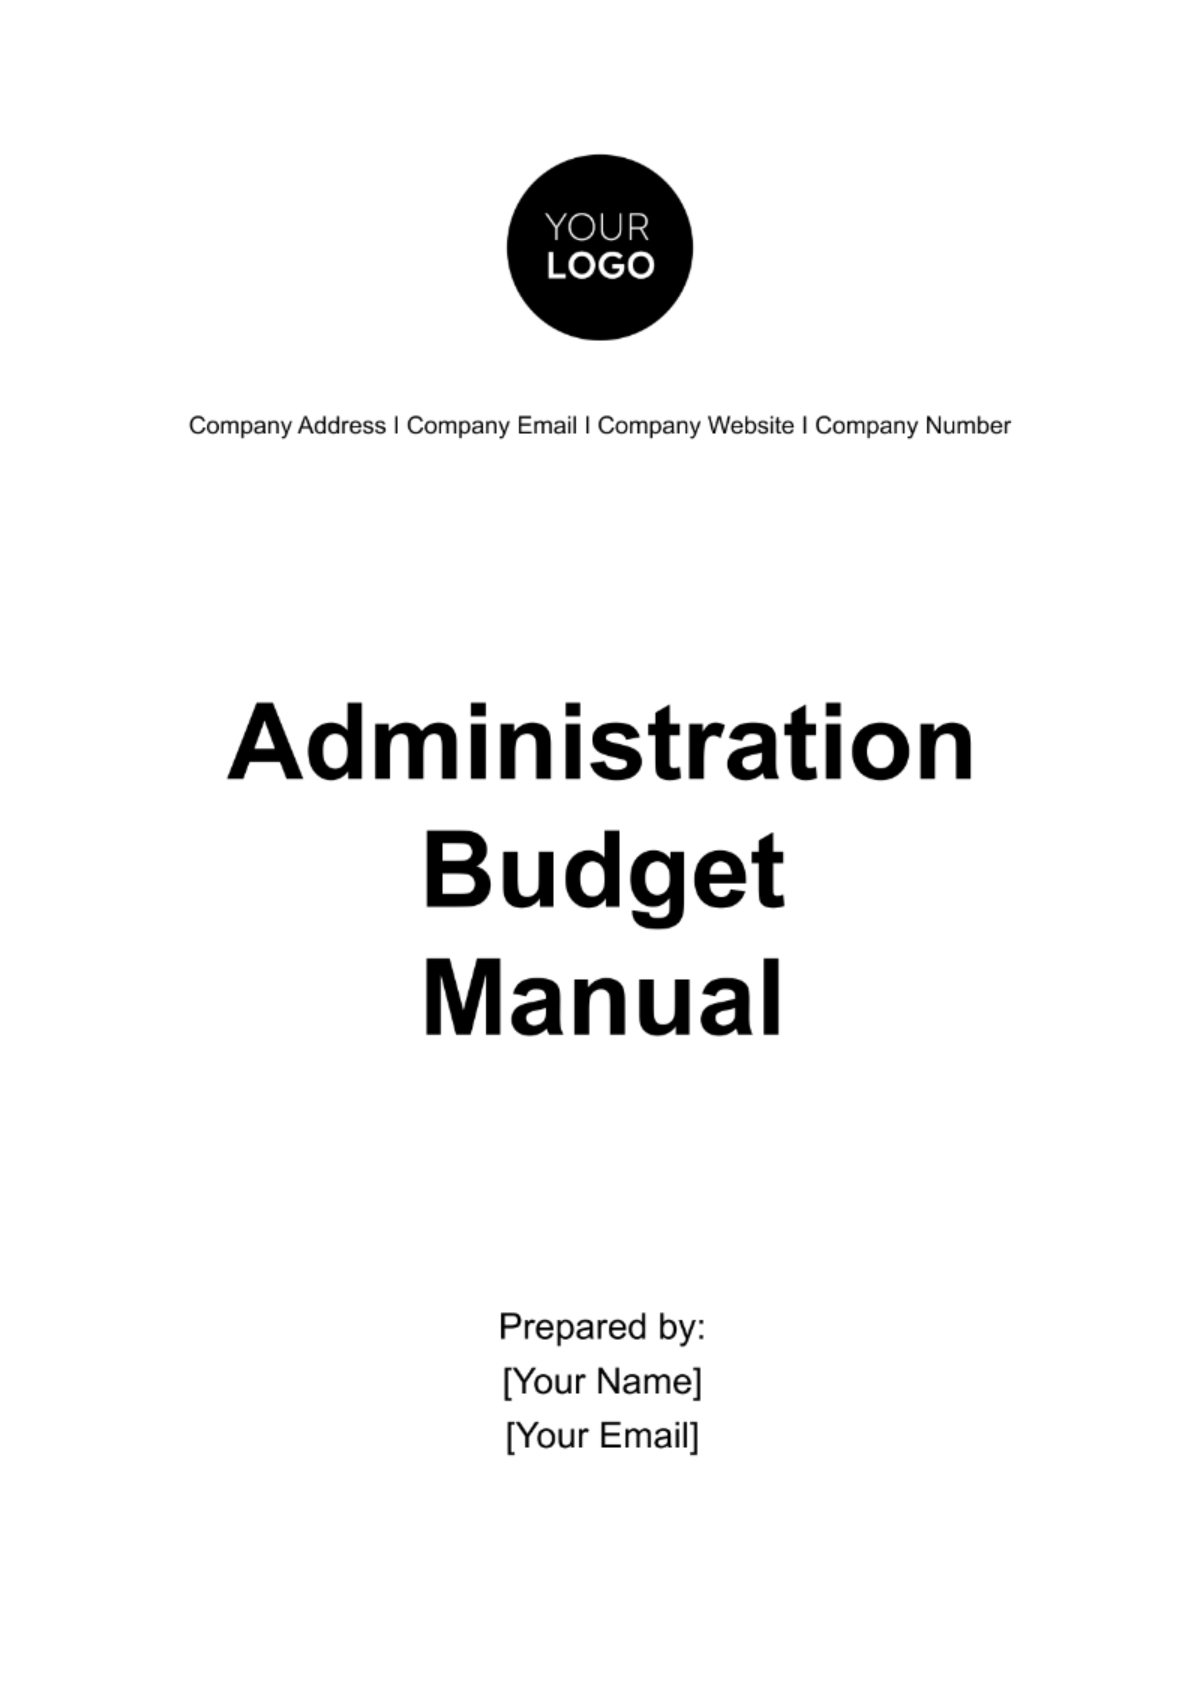 Administration Budget Manual Template